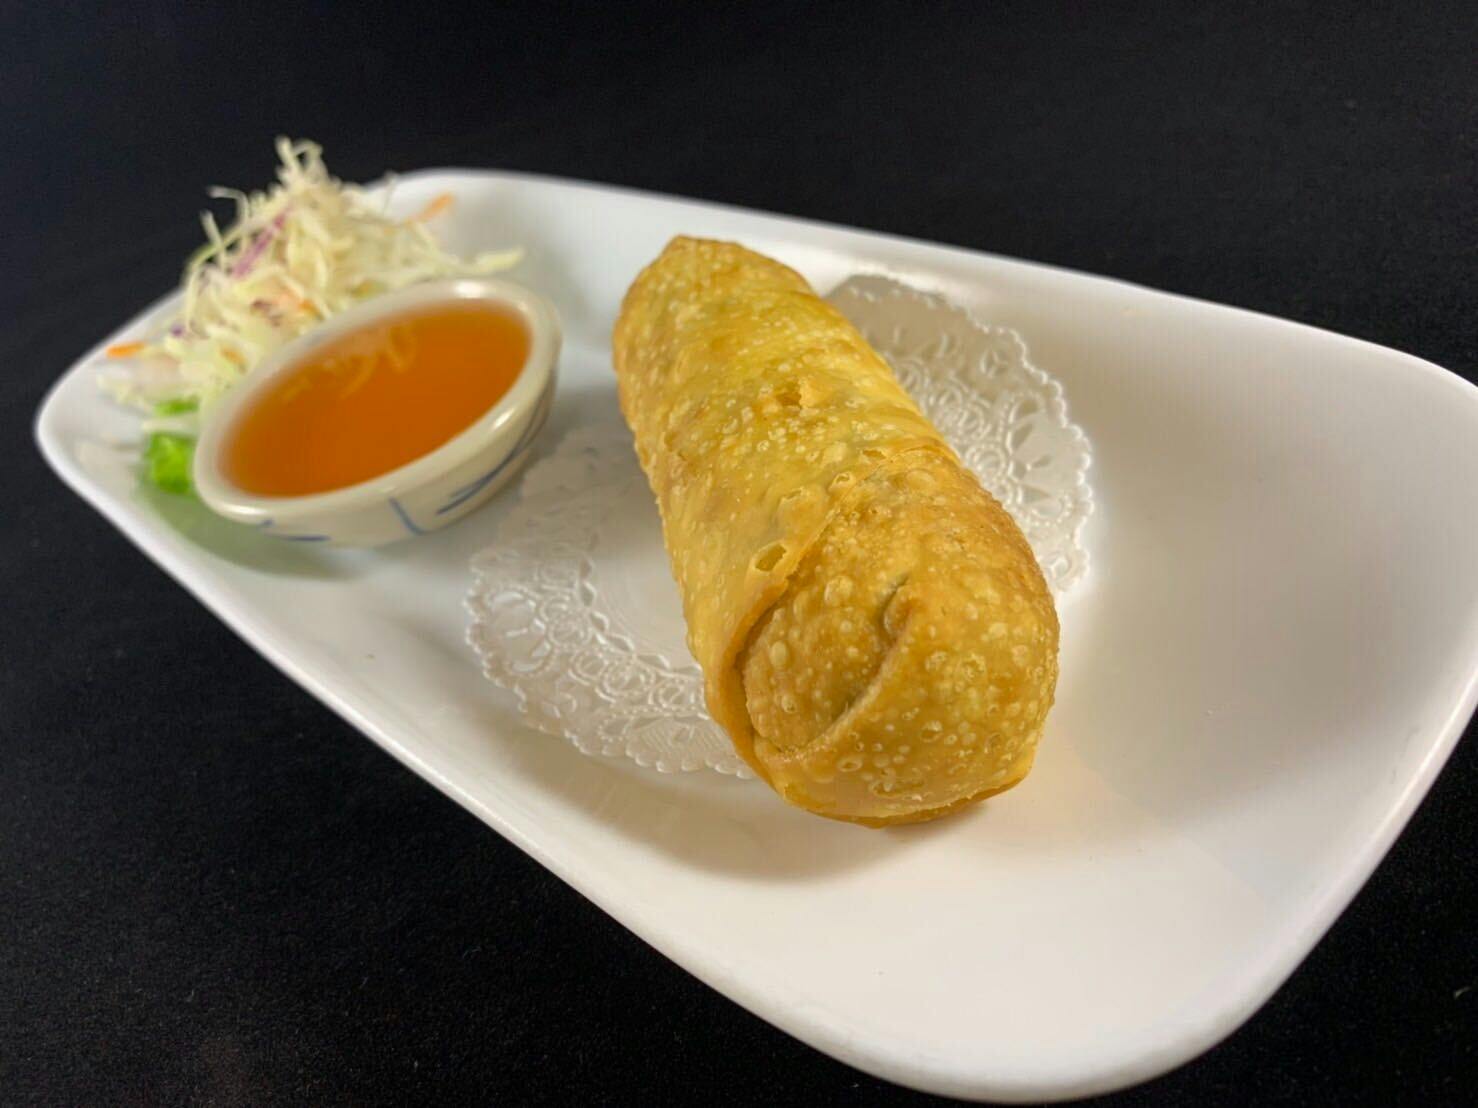 2. Egg Roll (Dinner) from Sa-Bai Thong - University Ave in Madison, WI